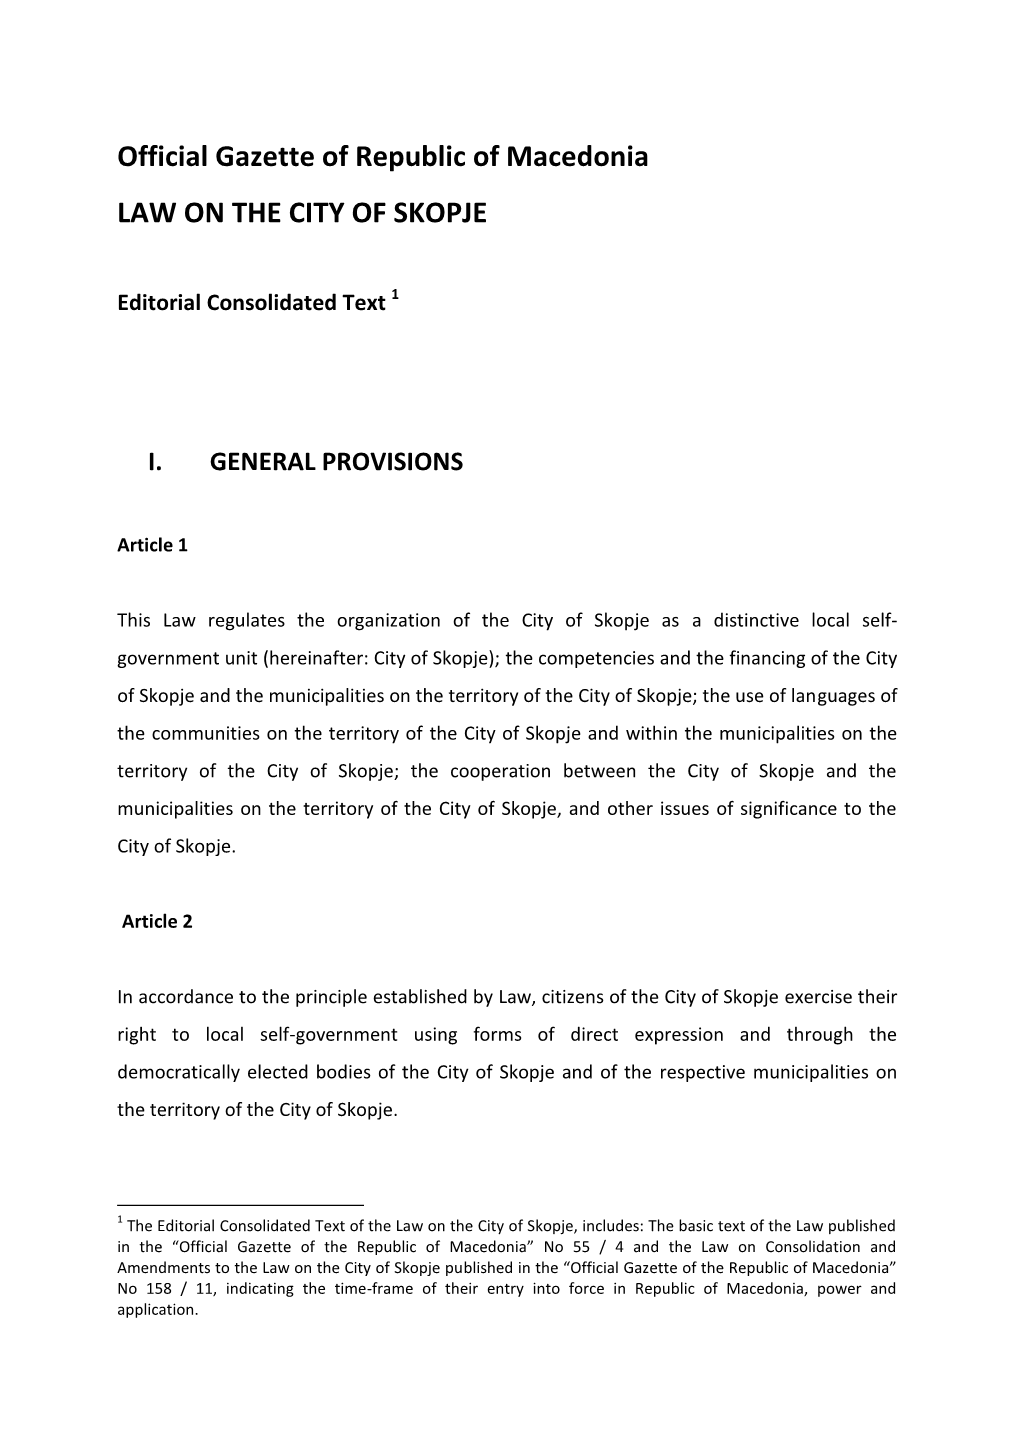 Official Gazette of Republic of Macedonia LAW on the CITY of SKOPJE